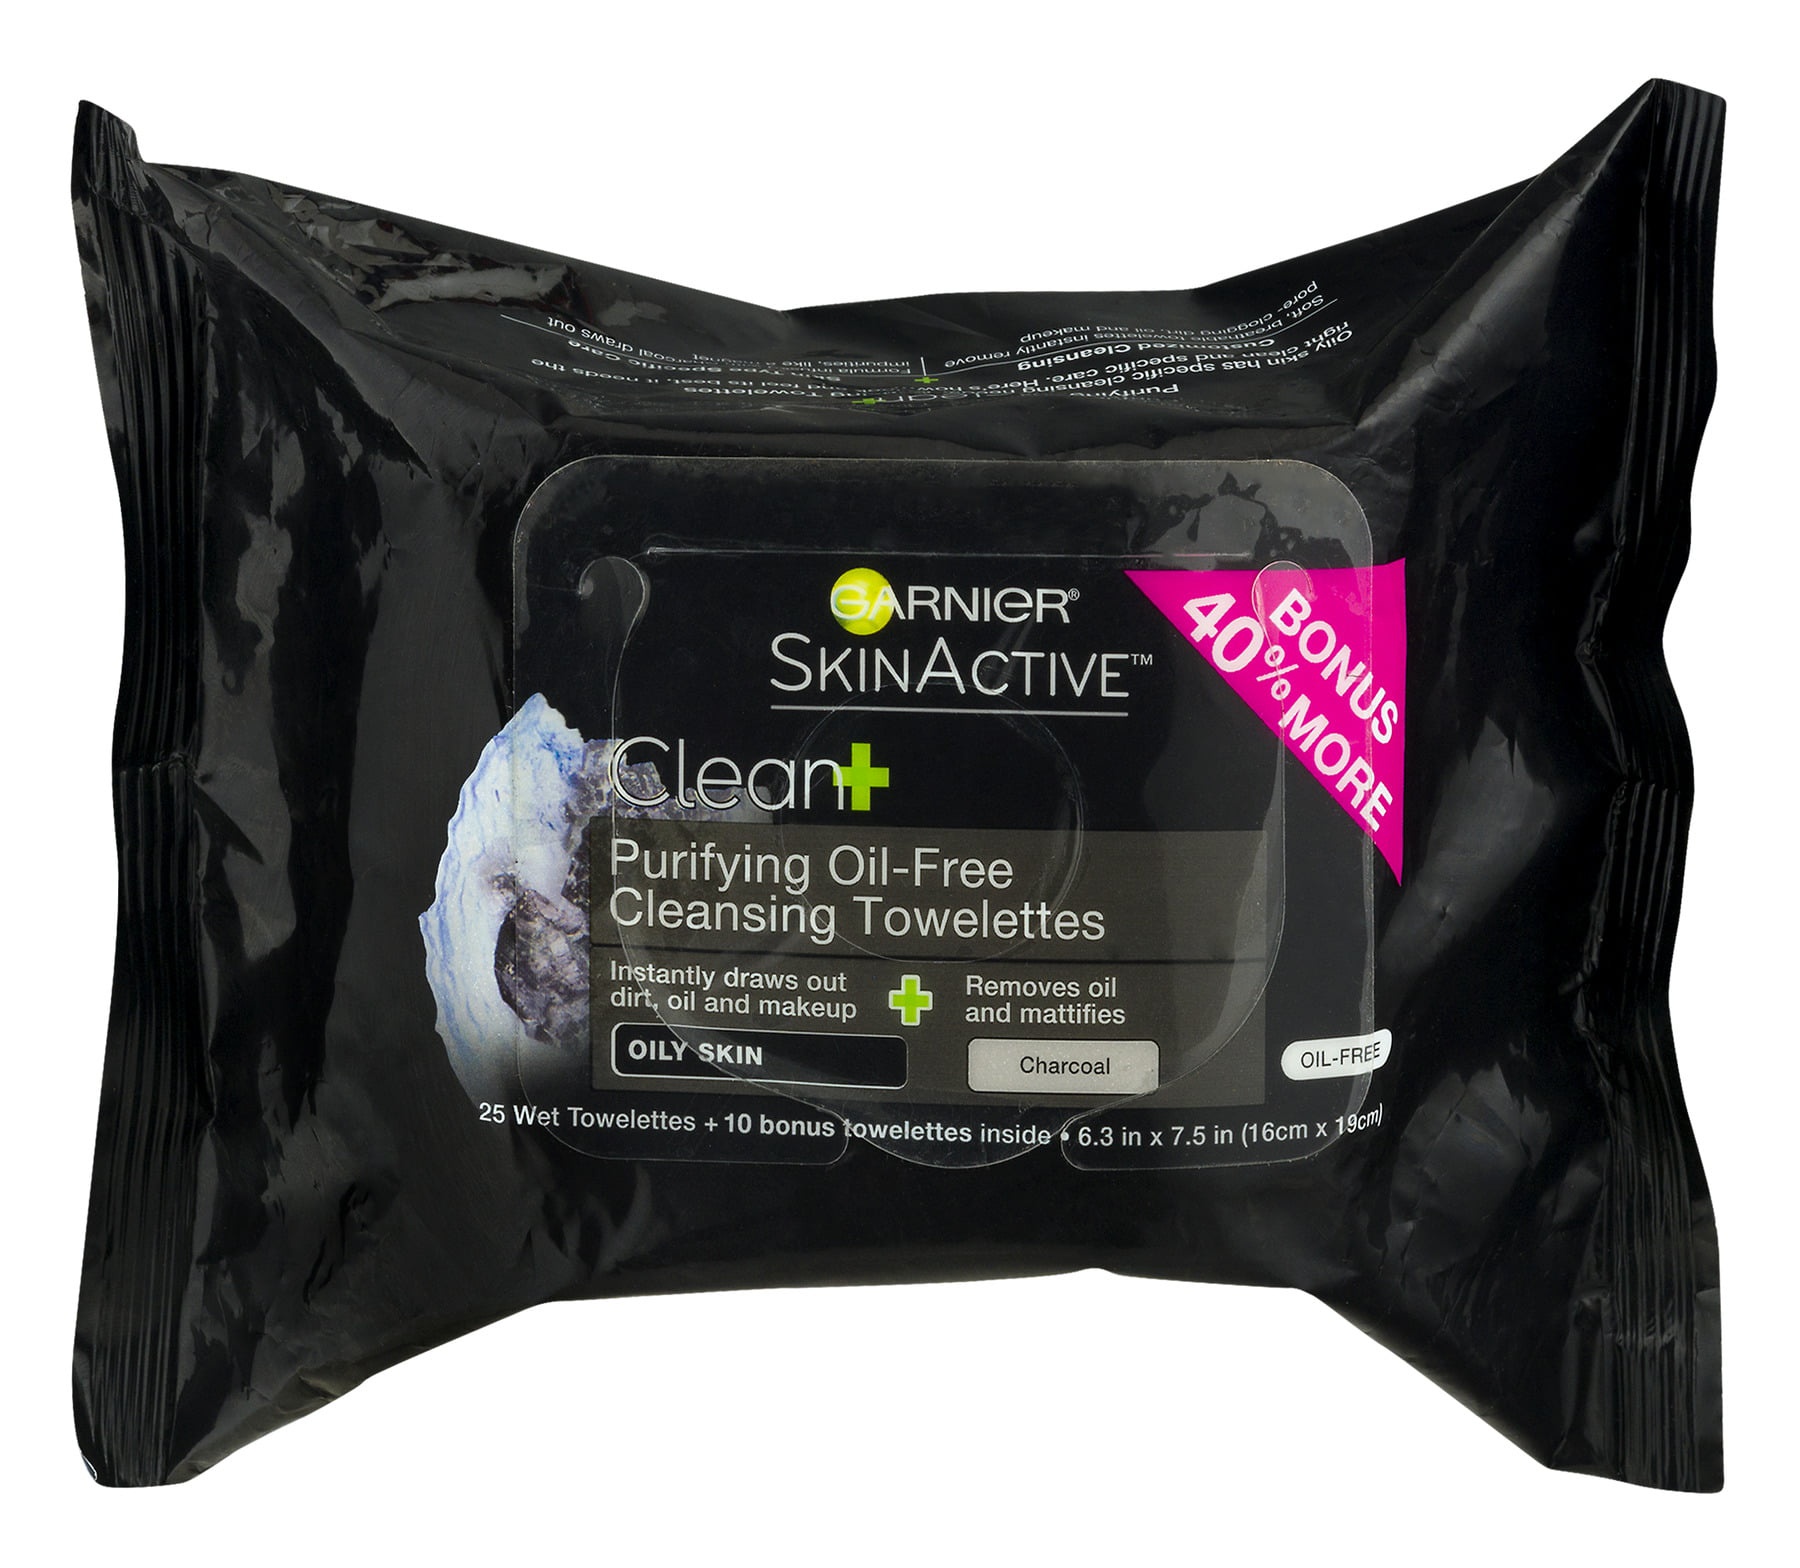 Garnier Skinactive Purifying Oil-free Cleansing Towelettes With Charcoal